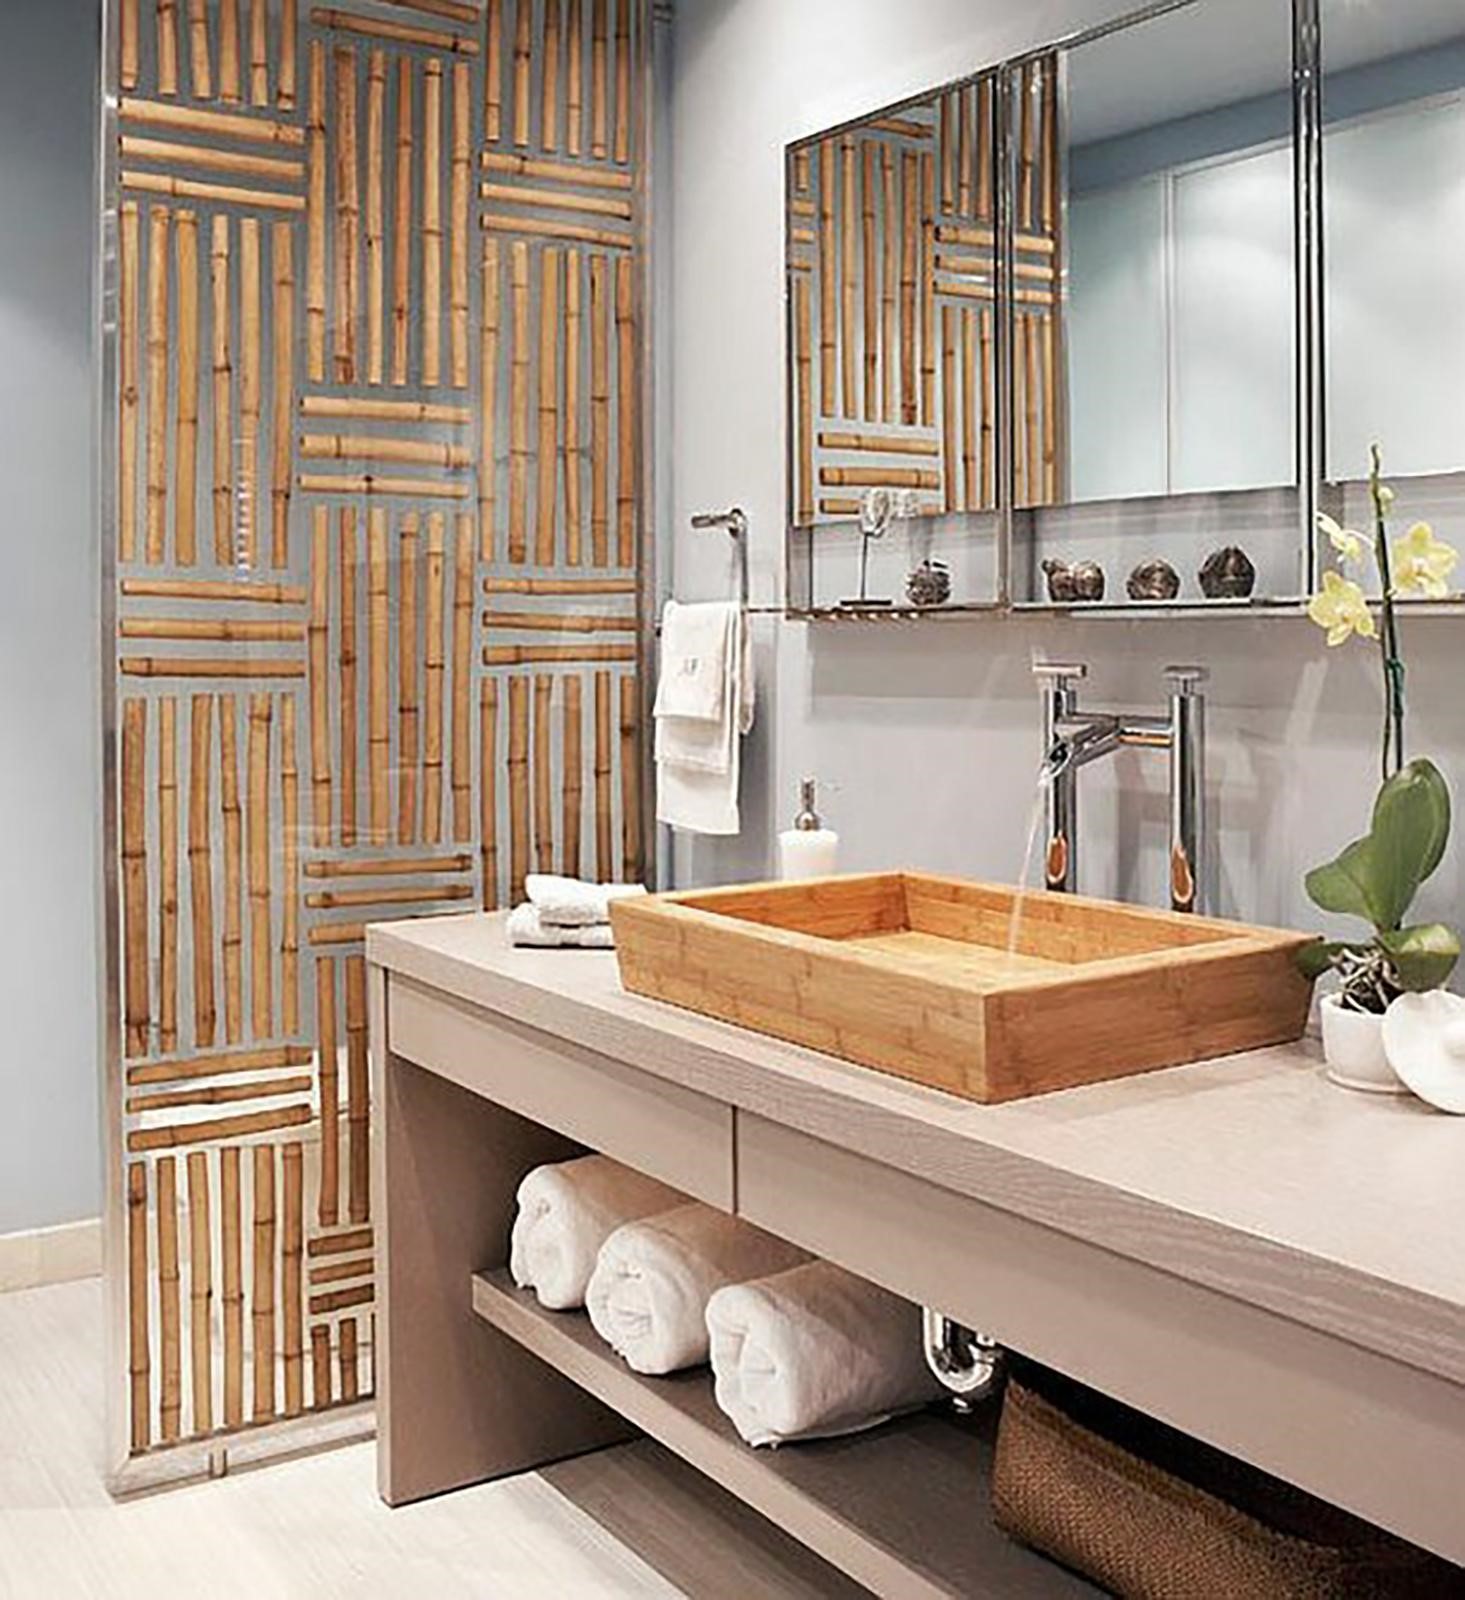 Bamboo Crafts for Your Bathroom